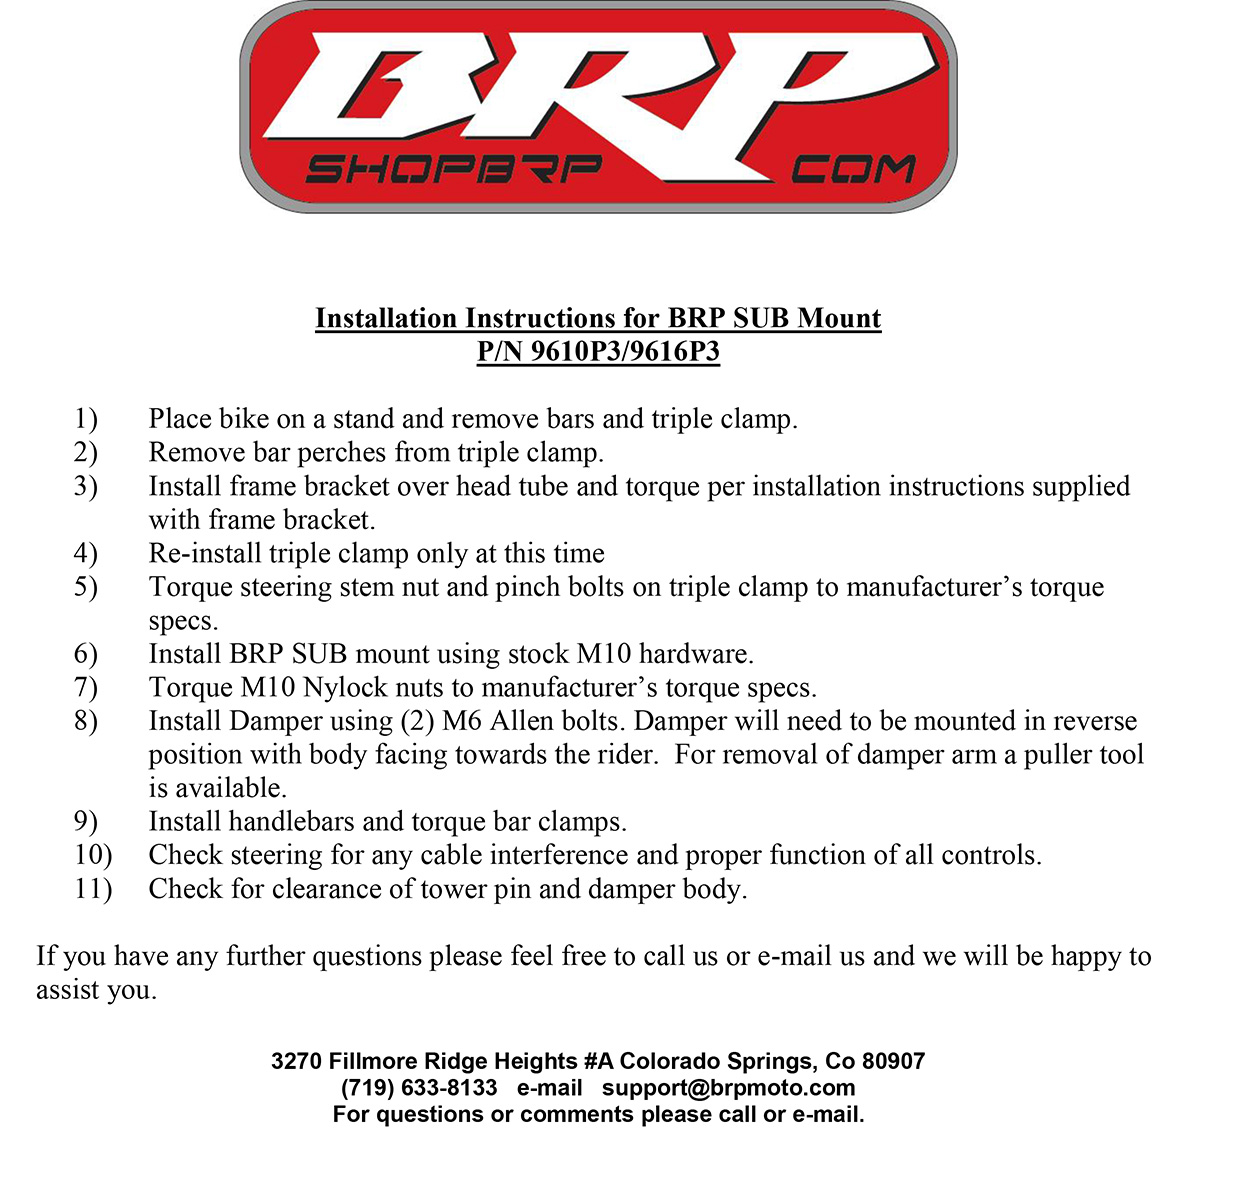 Installation Instructions for BRP SUB Mount